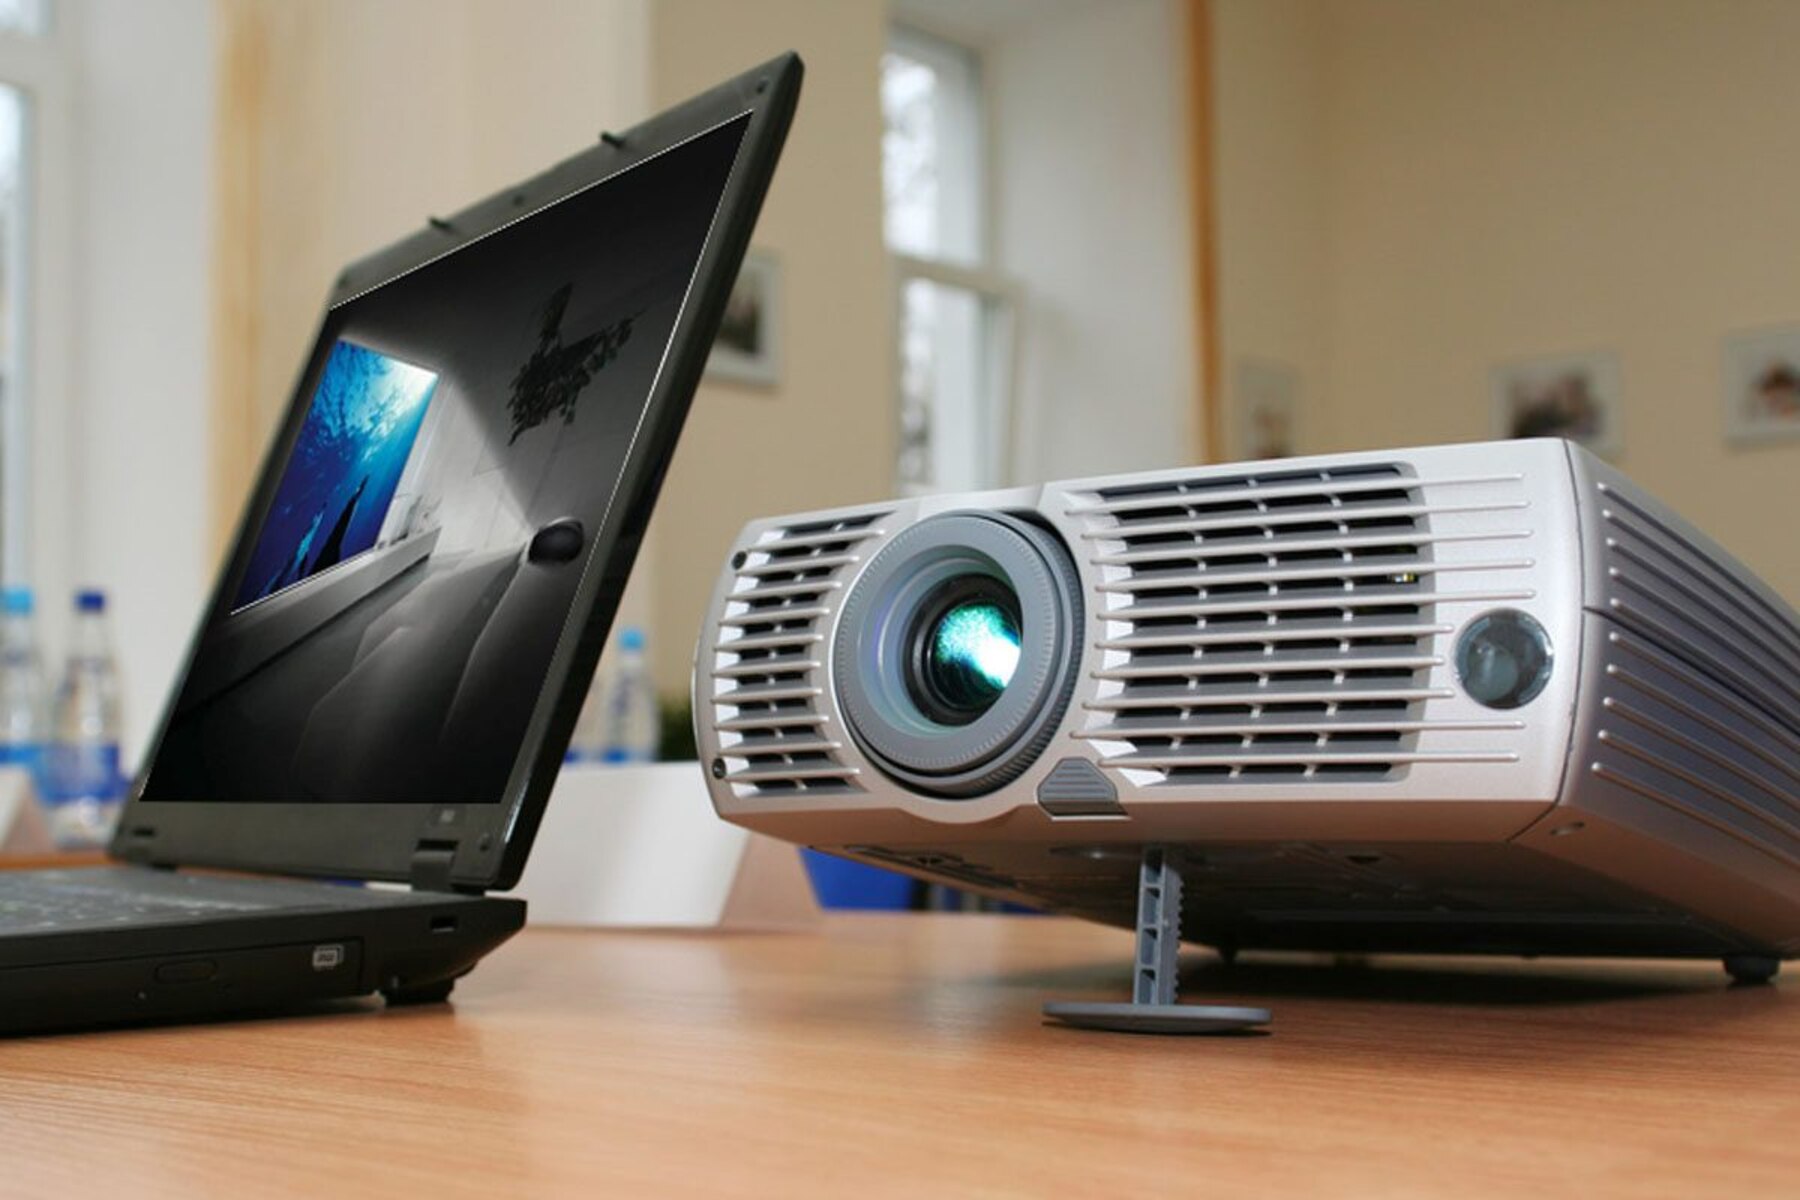 How To Use Infocus Projector With Laptop